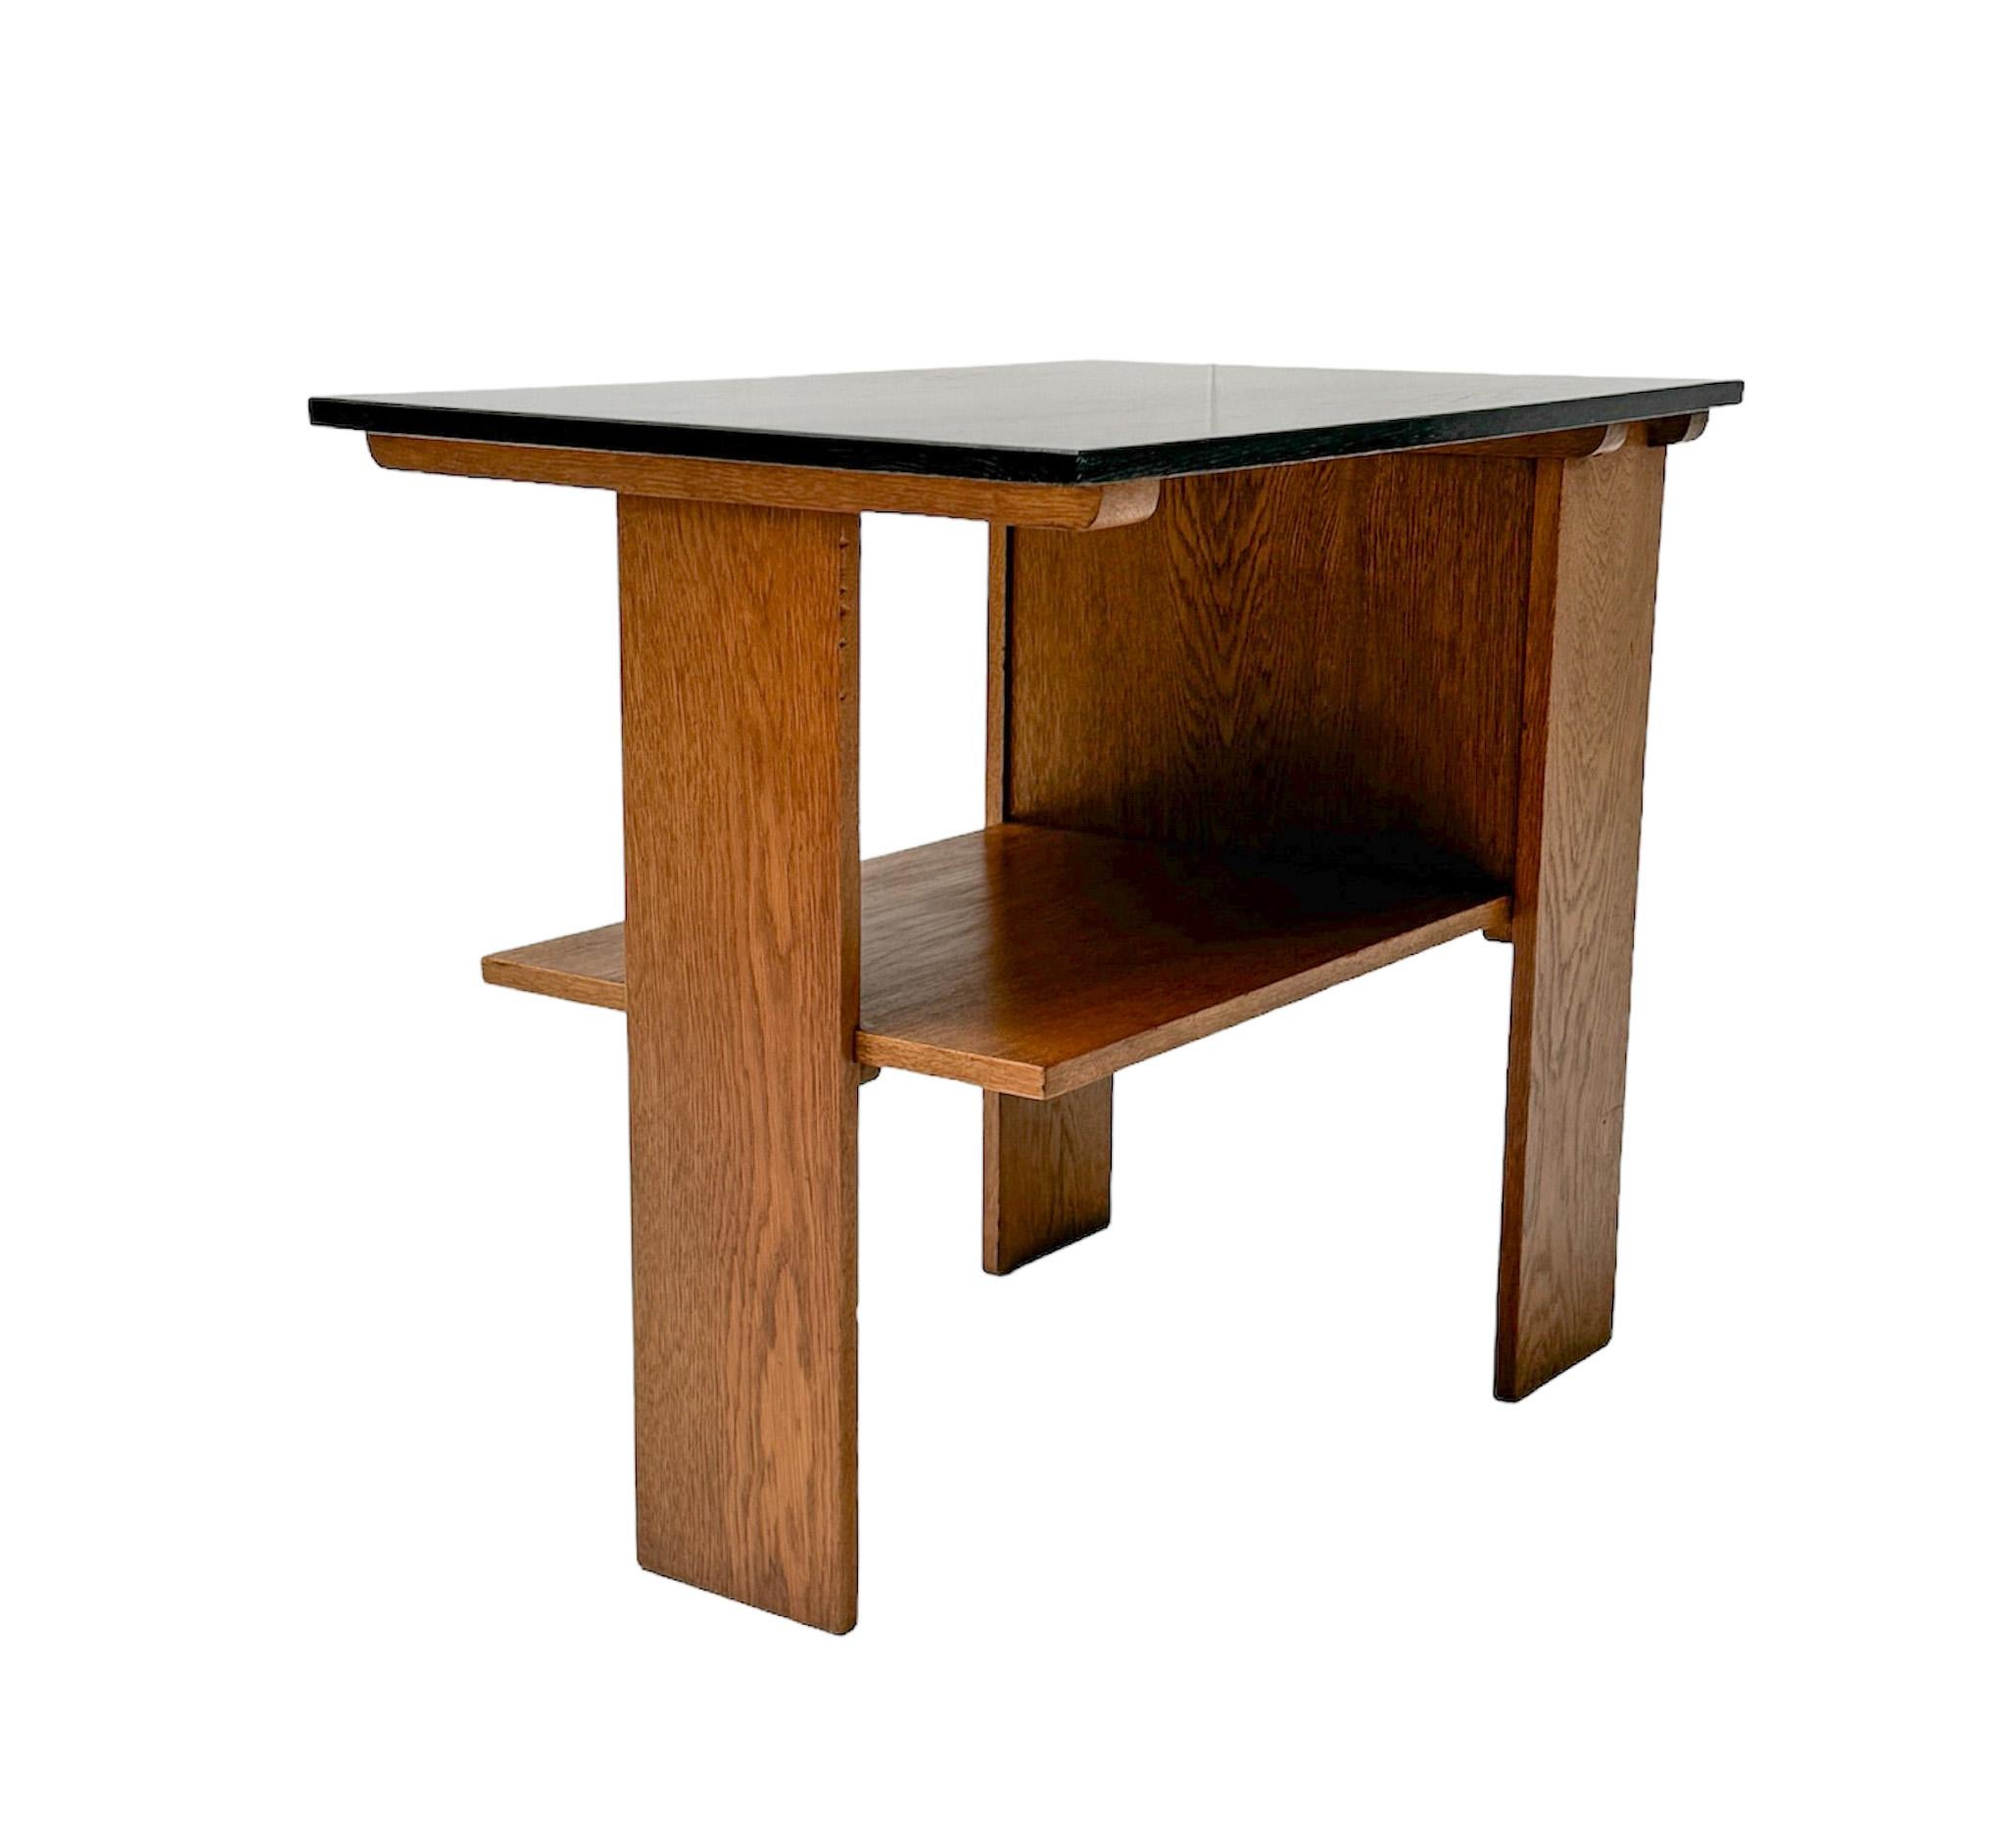 Magnificent and rare Art Deco Modernist serving table.
Design by Cor Alons for Winterkamp & Van Putten.
Striking Dutch design from the 1920s.
Solid oak asymmetrical base with original black lacquered top.
This wonderful Art Deco Modernist serving